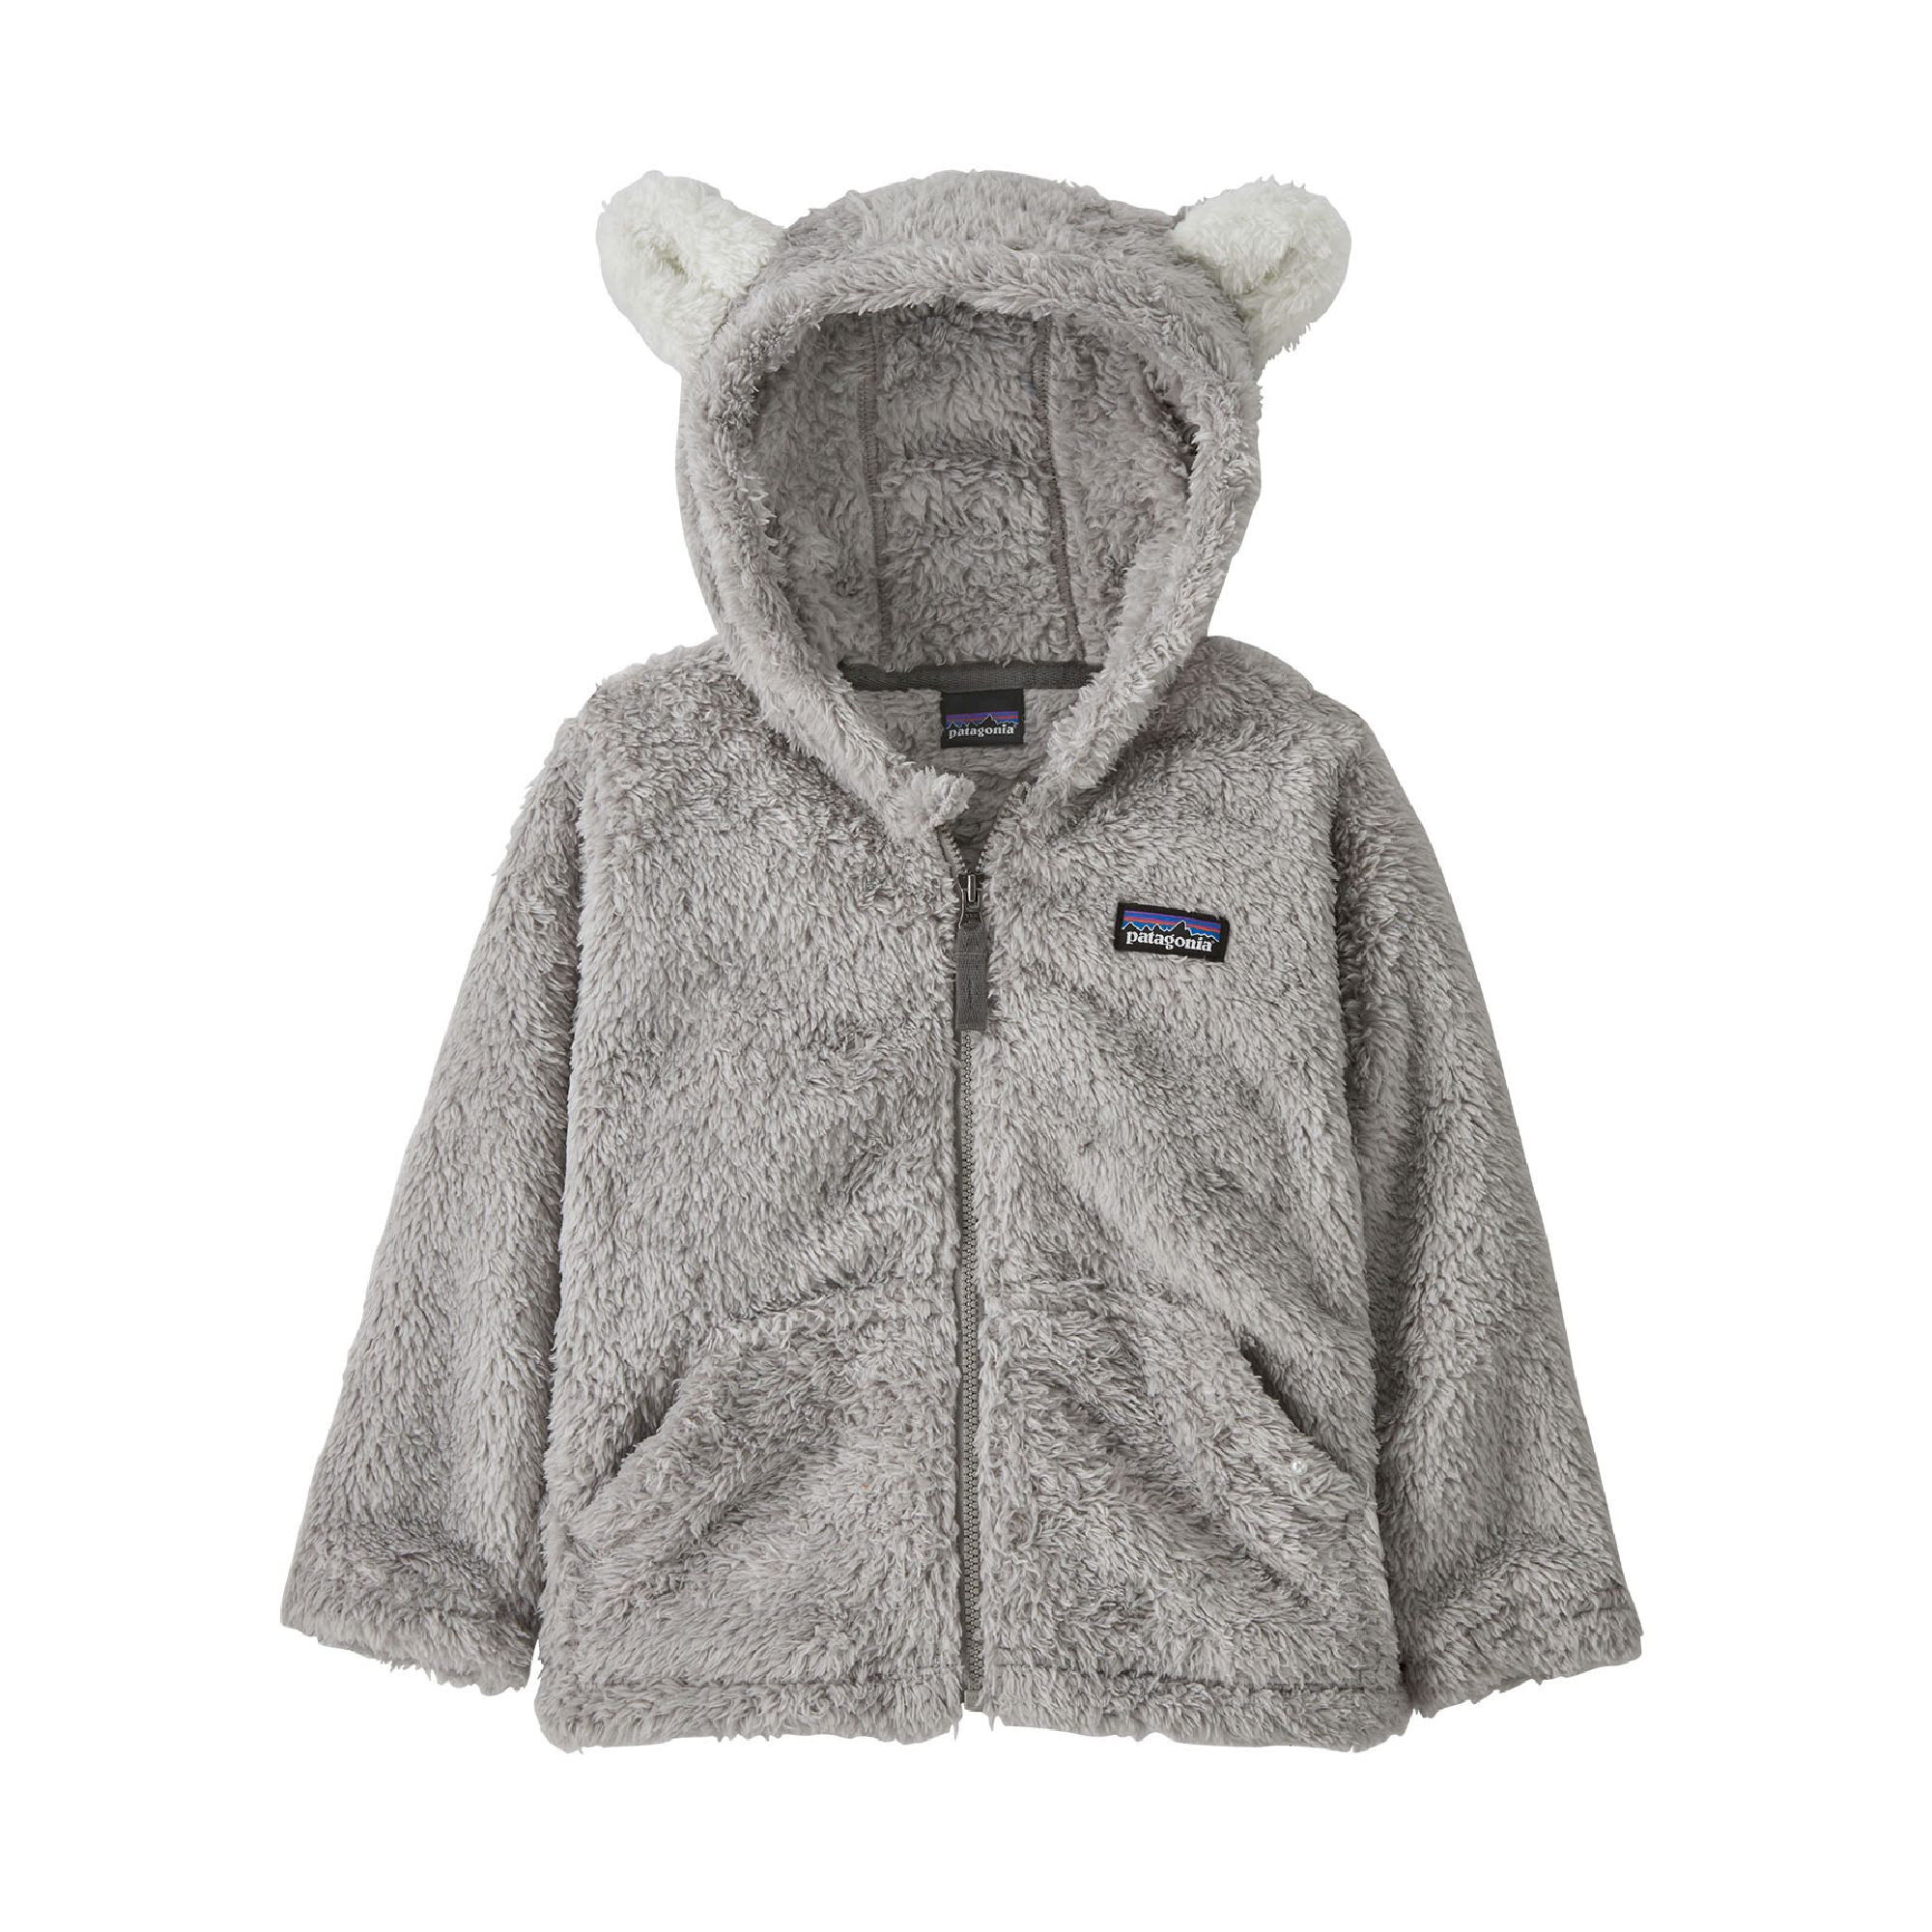 Patagonia - Baby Furry Friends Hoody - Giacca in pile - Bambini